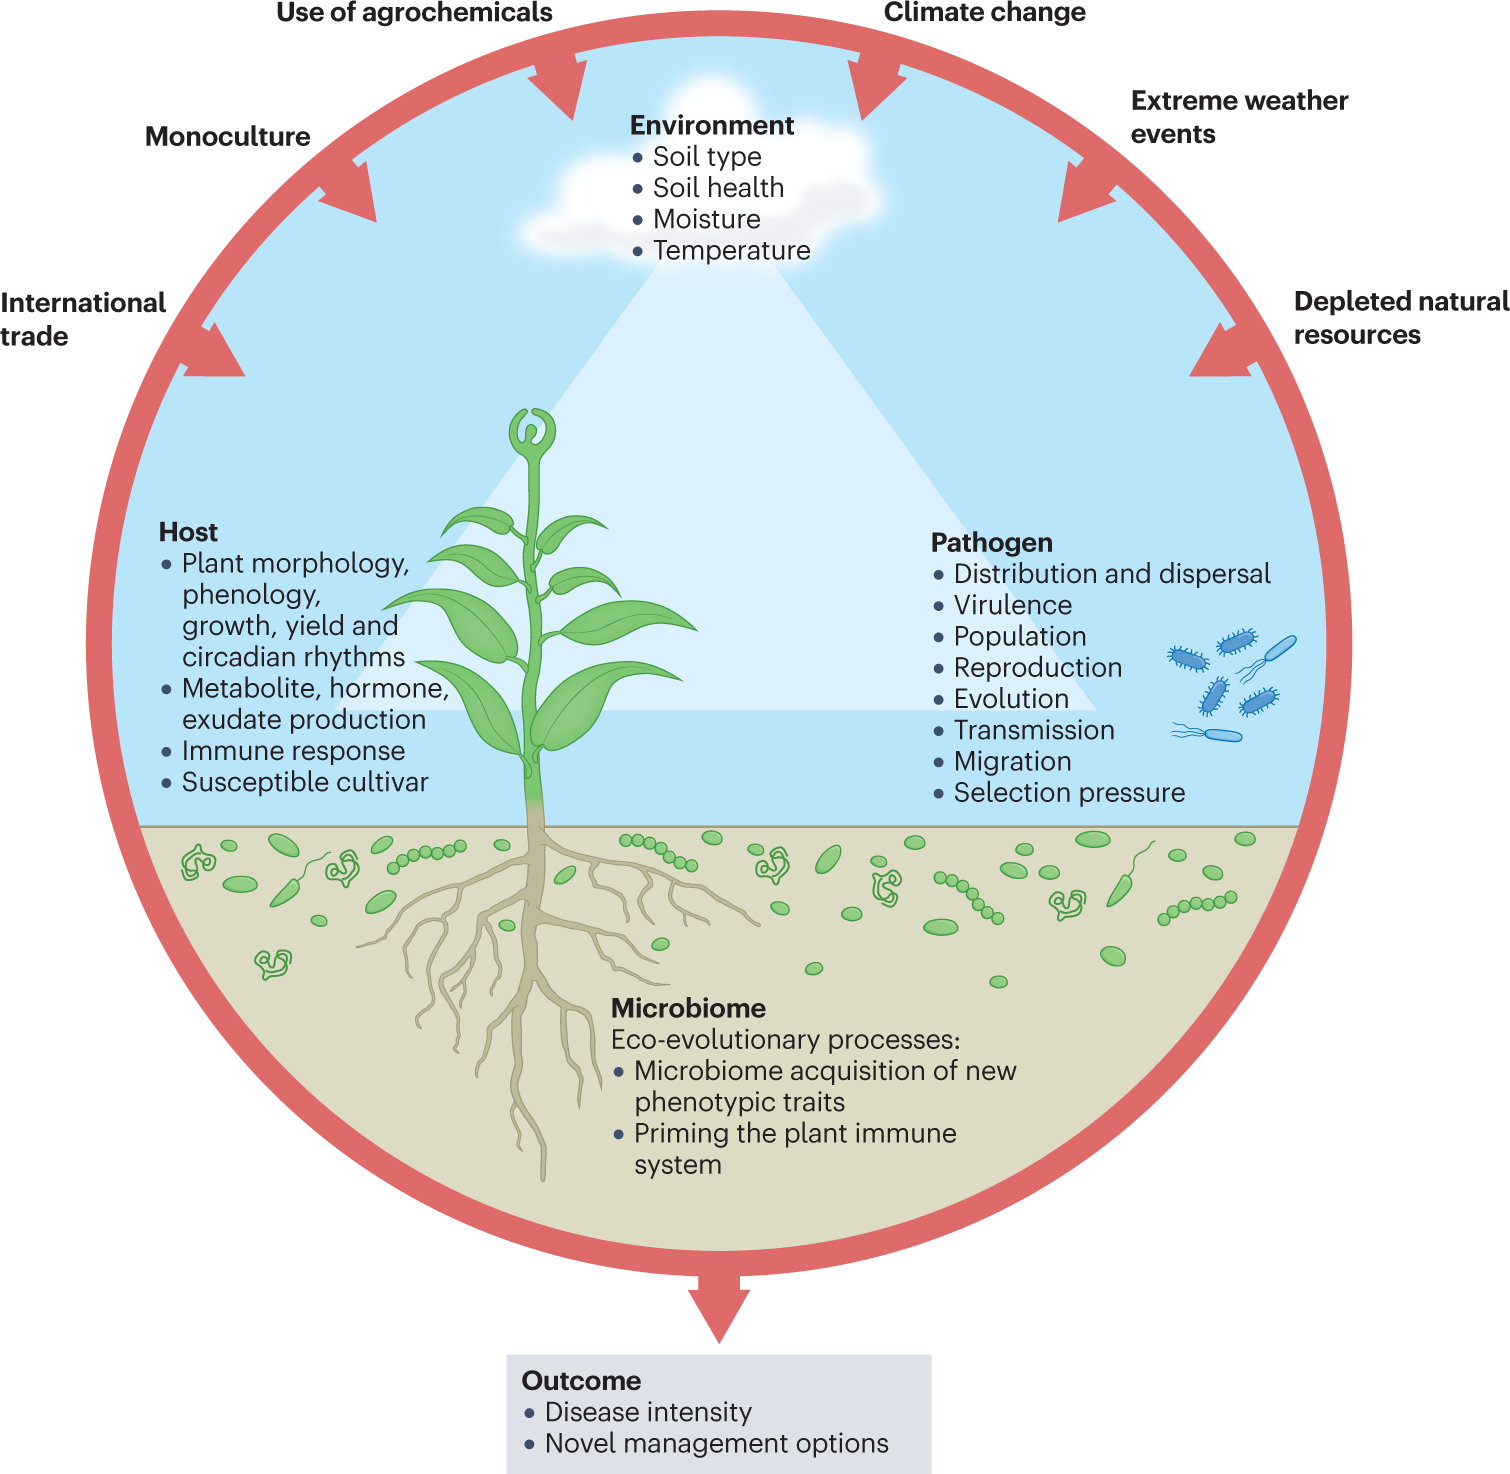 Under The Oak Tree Ch 26 Climate change impacts on plant pathogens, food security and paths forward  | Nature Reviews Microbiology